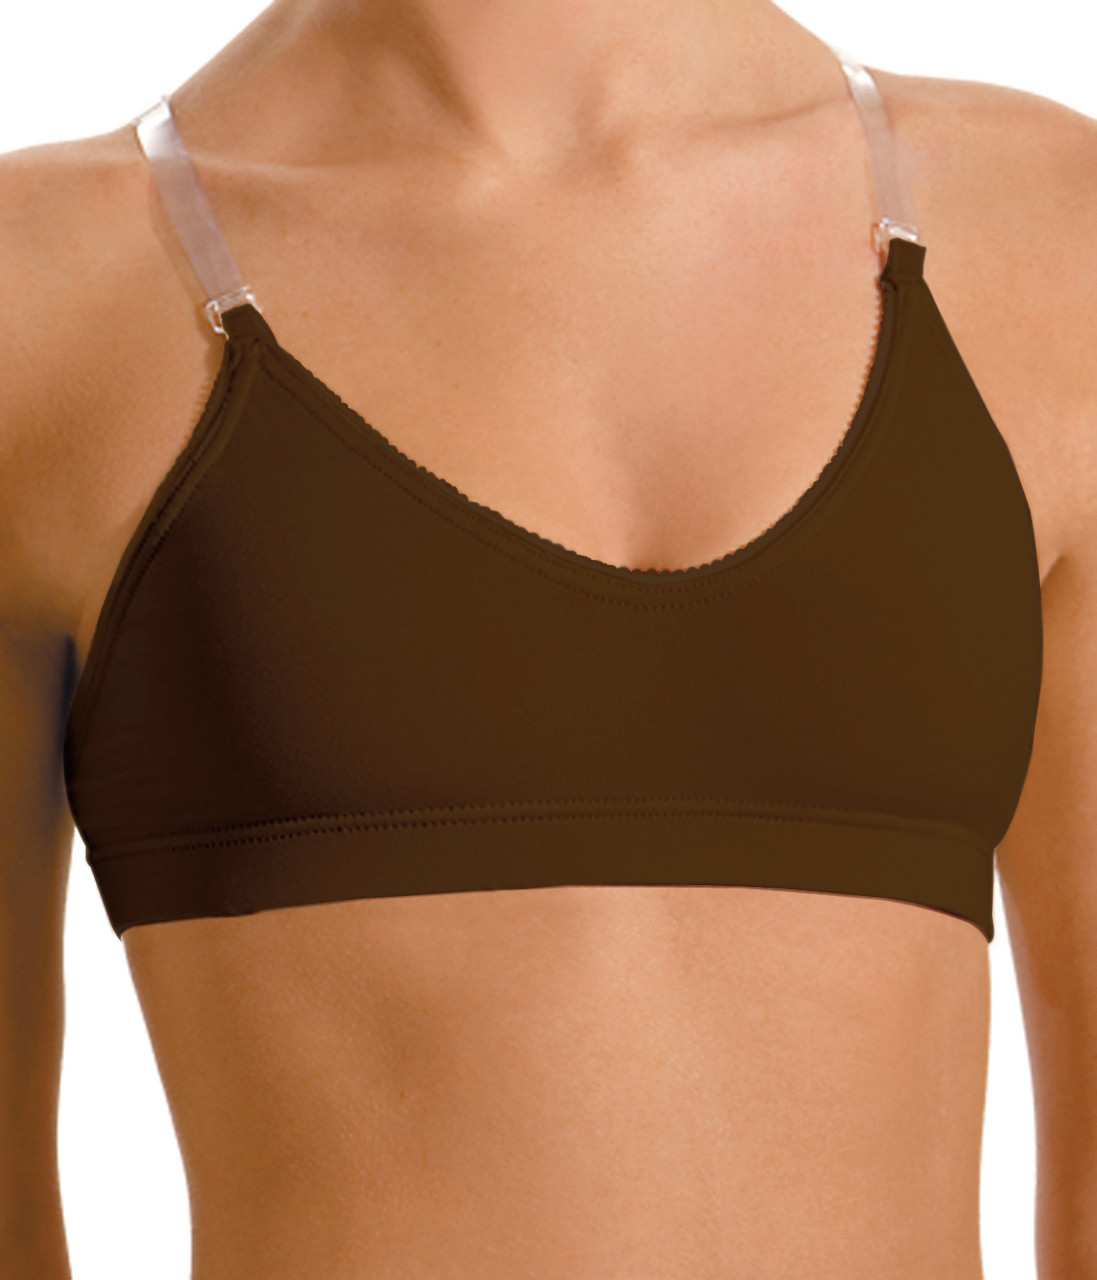 Body Wrappers Adjustable Camisole Pull On Bra 261 : Dance Max Dancewear